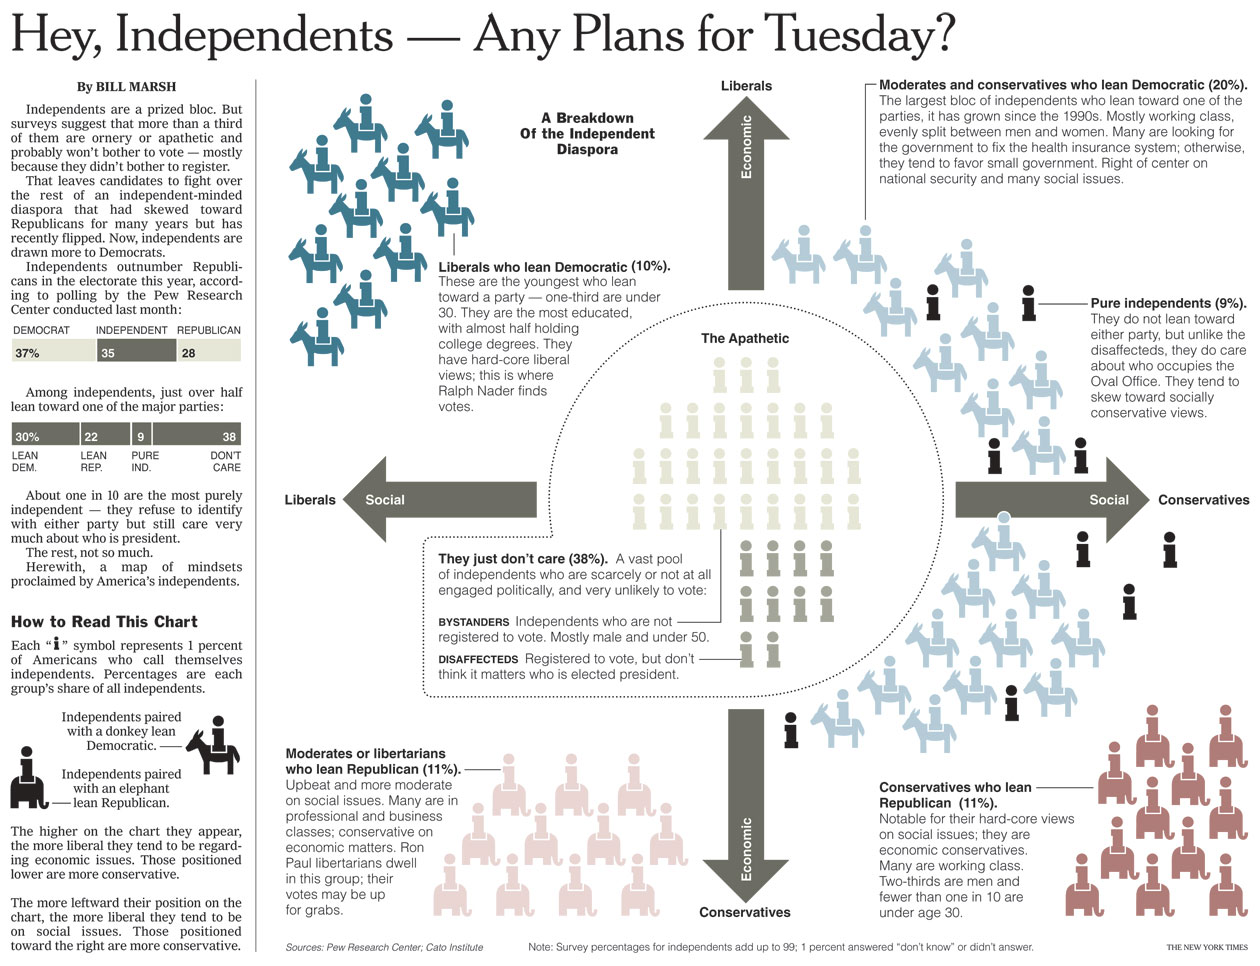 hey, independent - any plans for tuesday